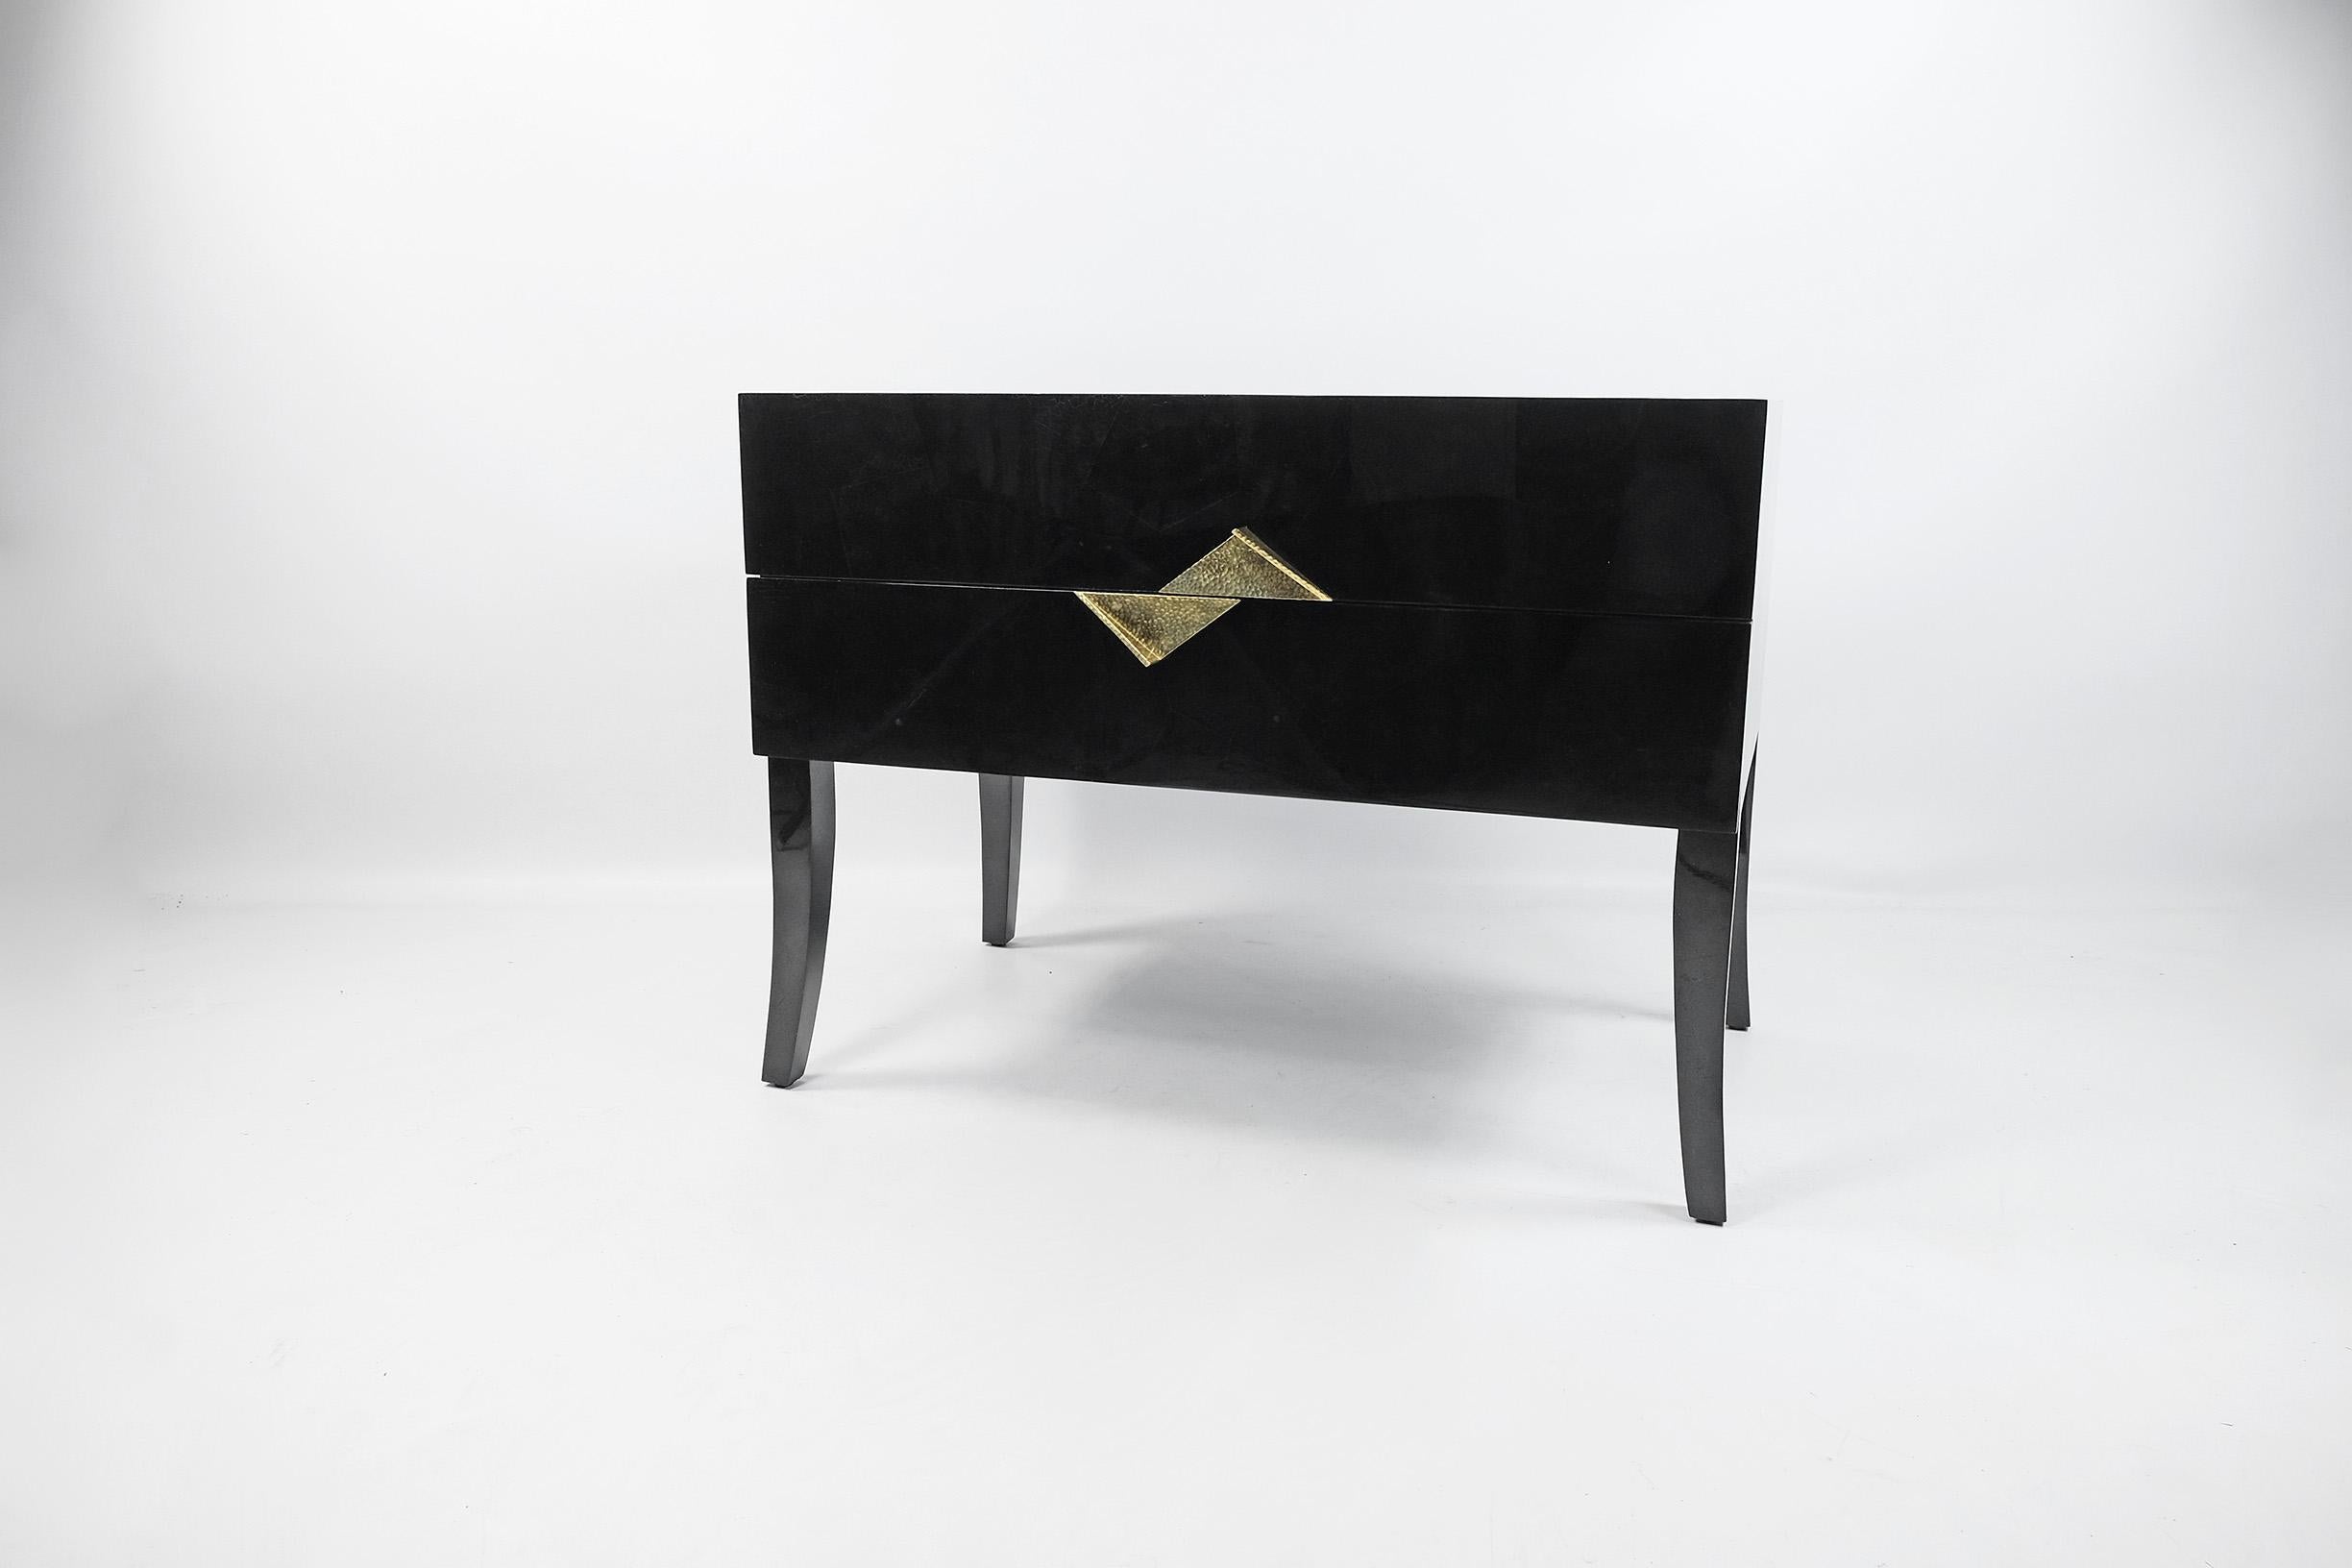 This rectangular bedside table has two drawers and it is made of a black shell marquetry.
The handles are in casted brass.
The interior has a dark wood veneer.
There are 4 feet in black shell with a curved design.

 
The dimensions of this